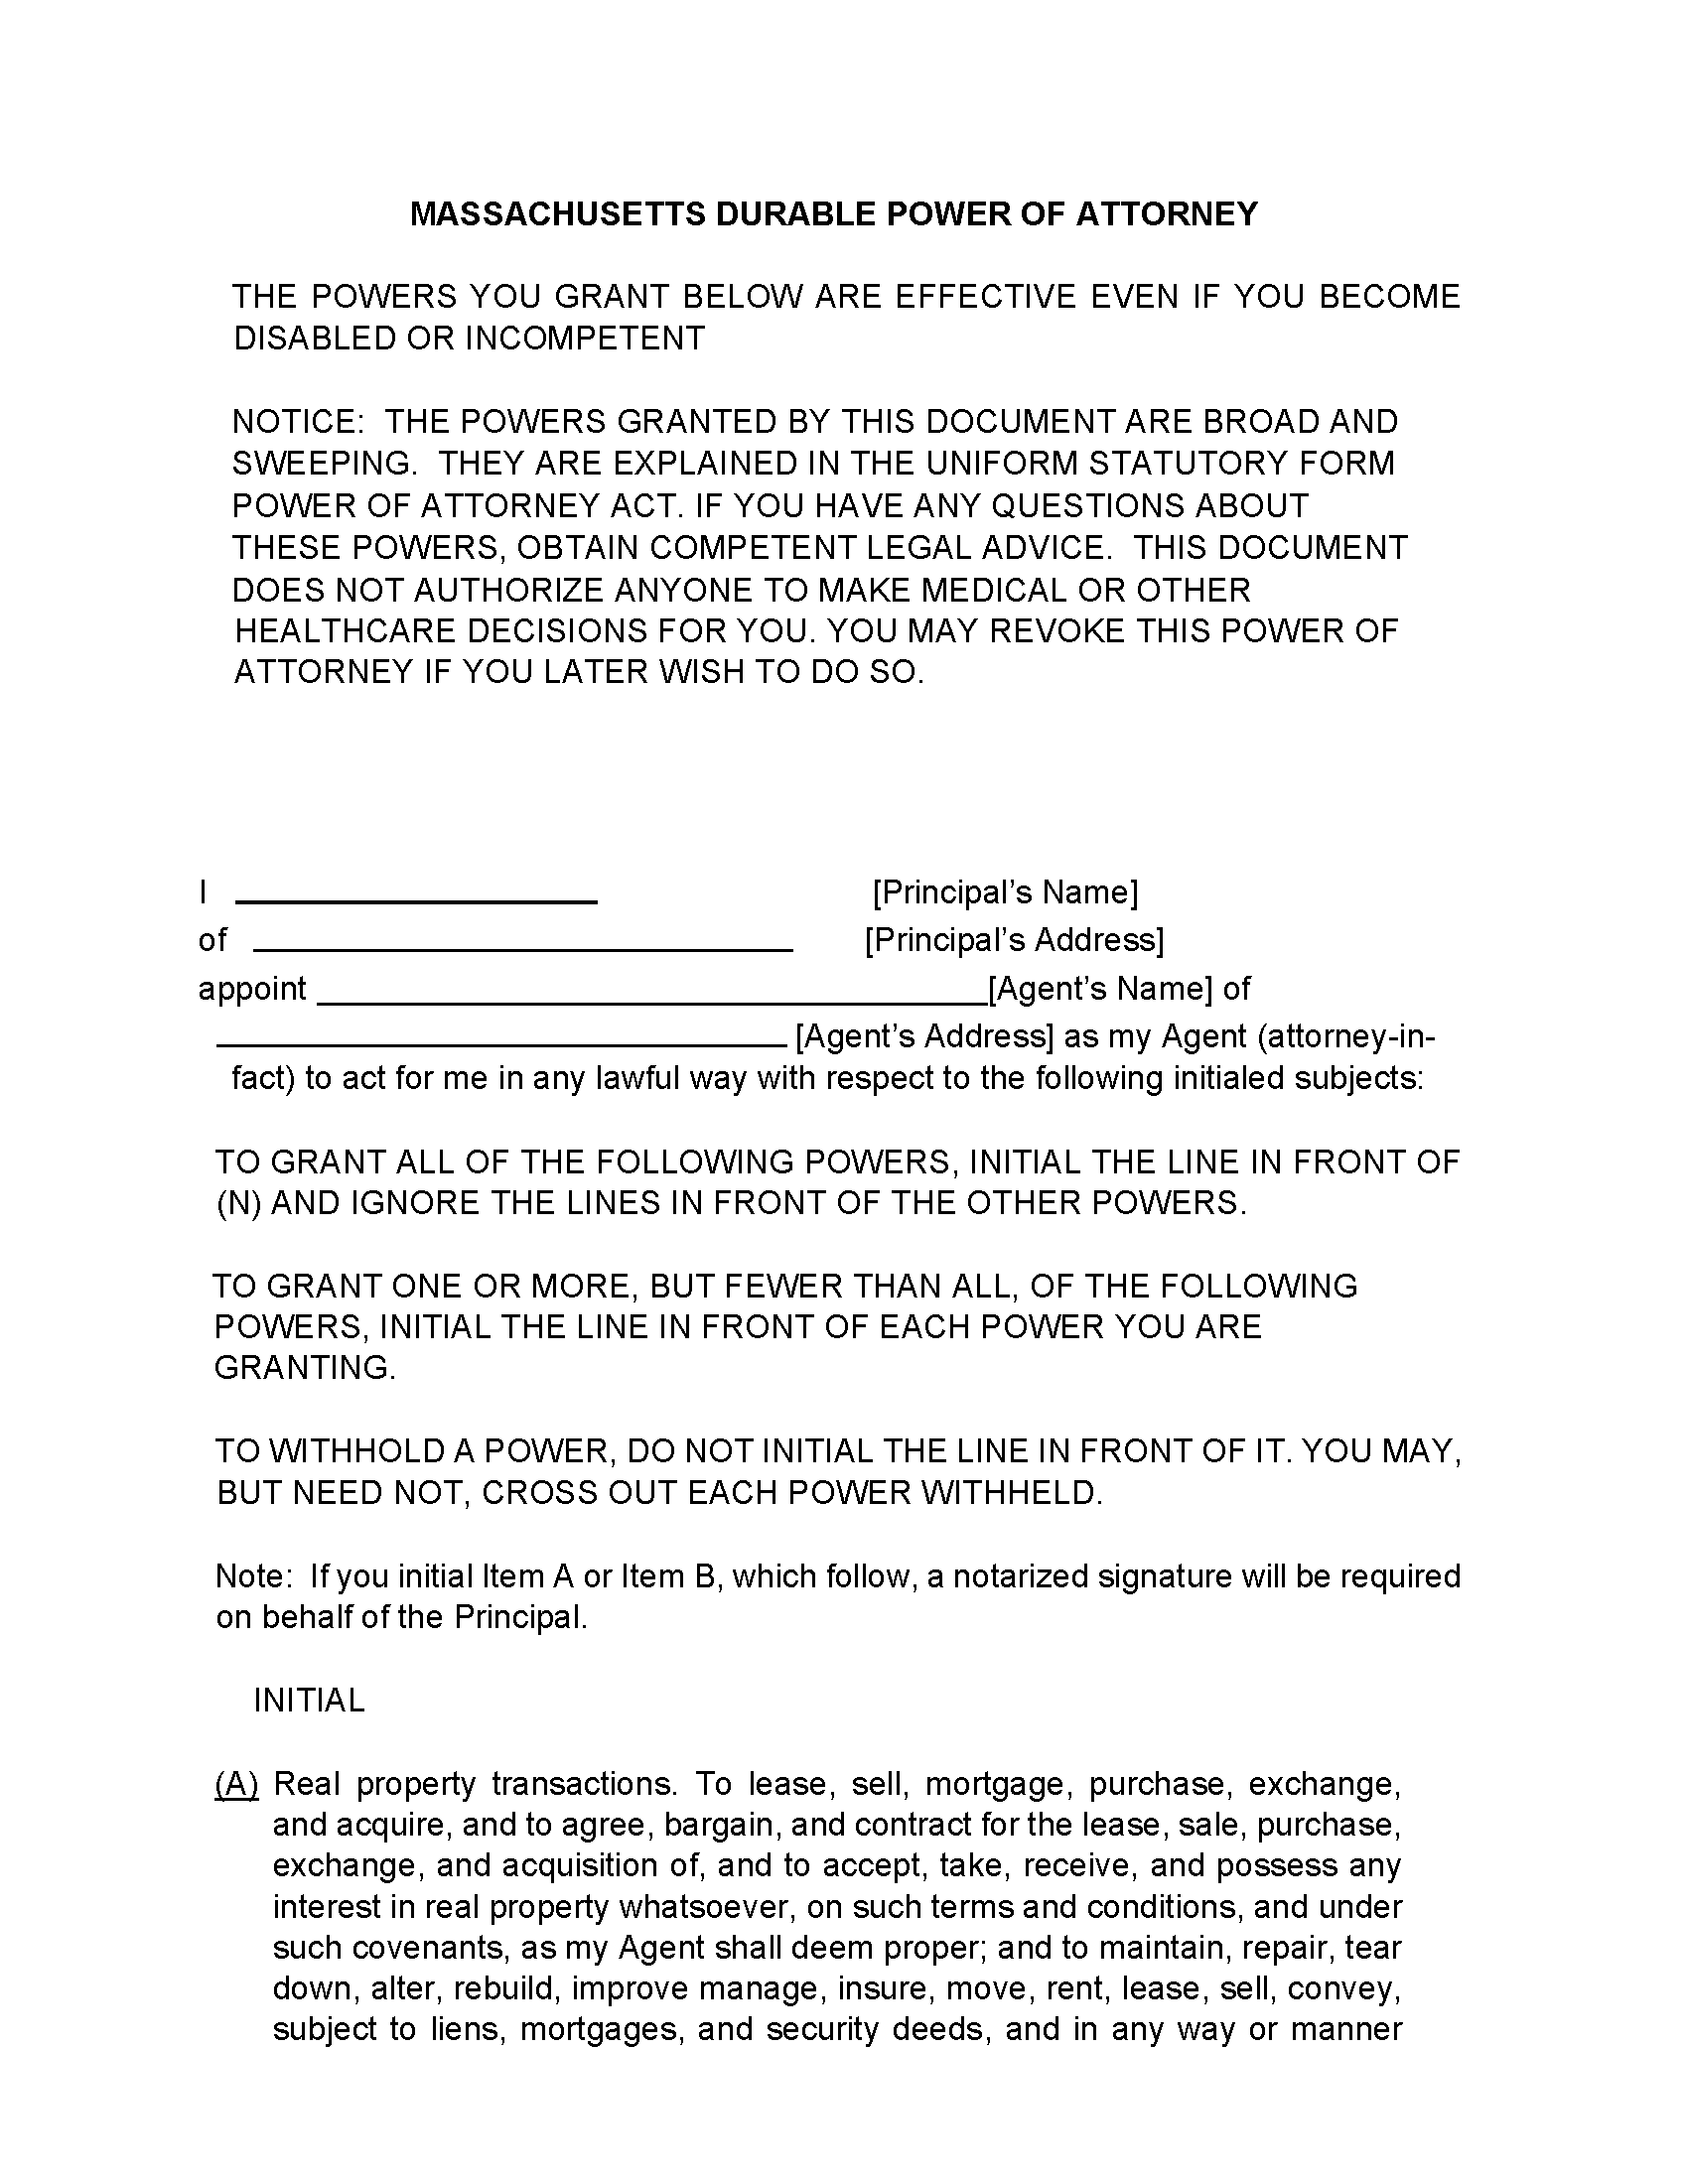 printable-durable-power-of-attorney-form-massachusetts-printable-forms-free-online